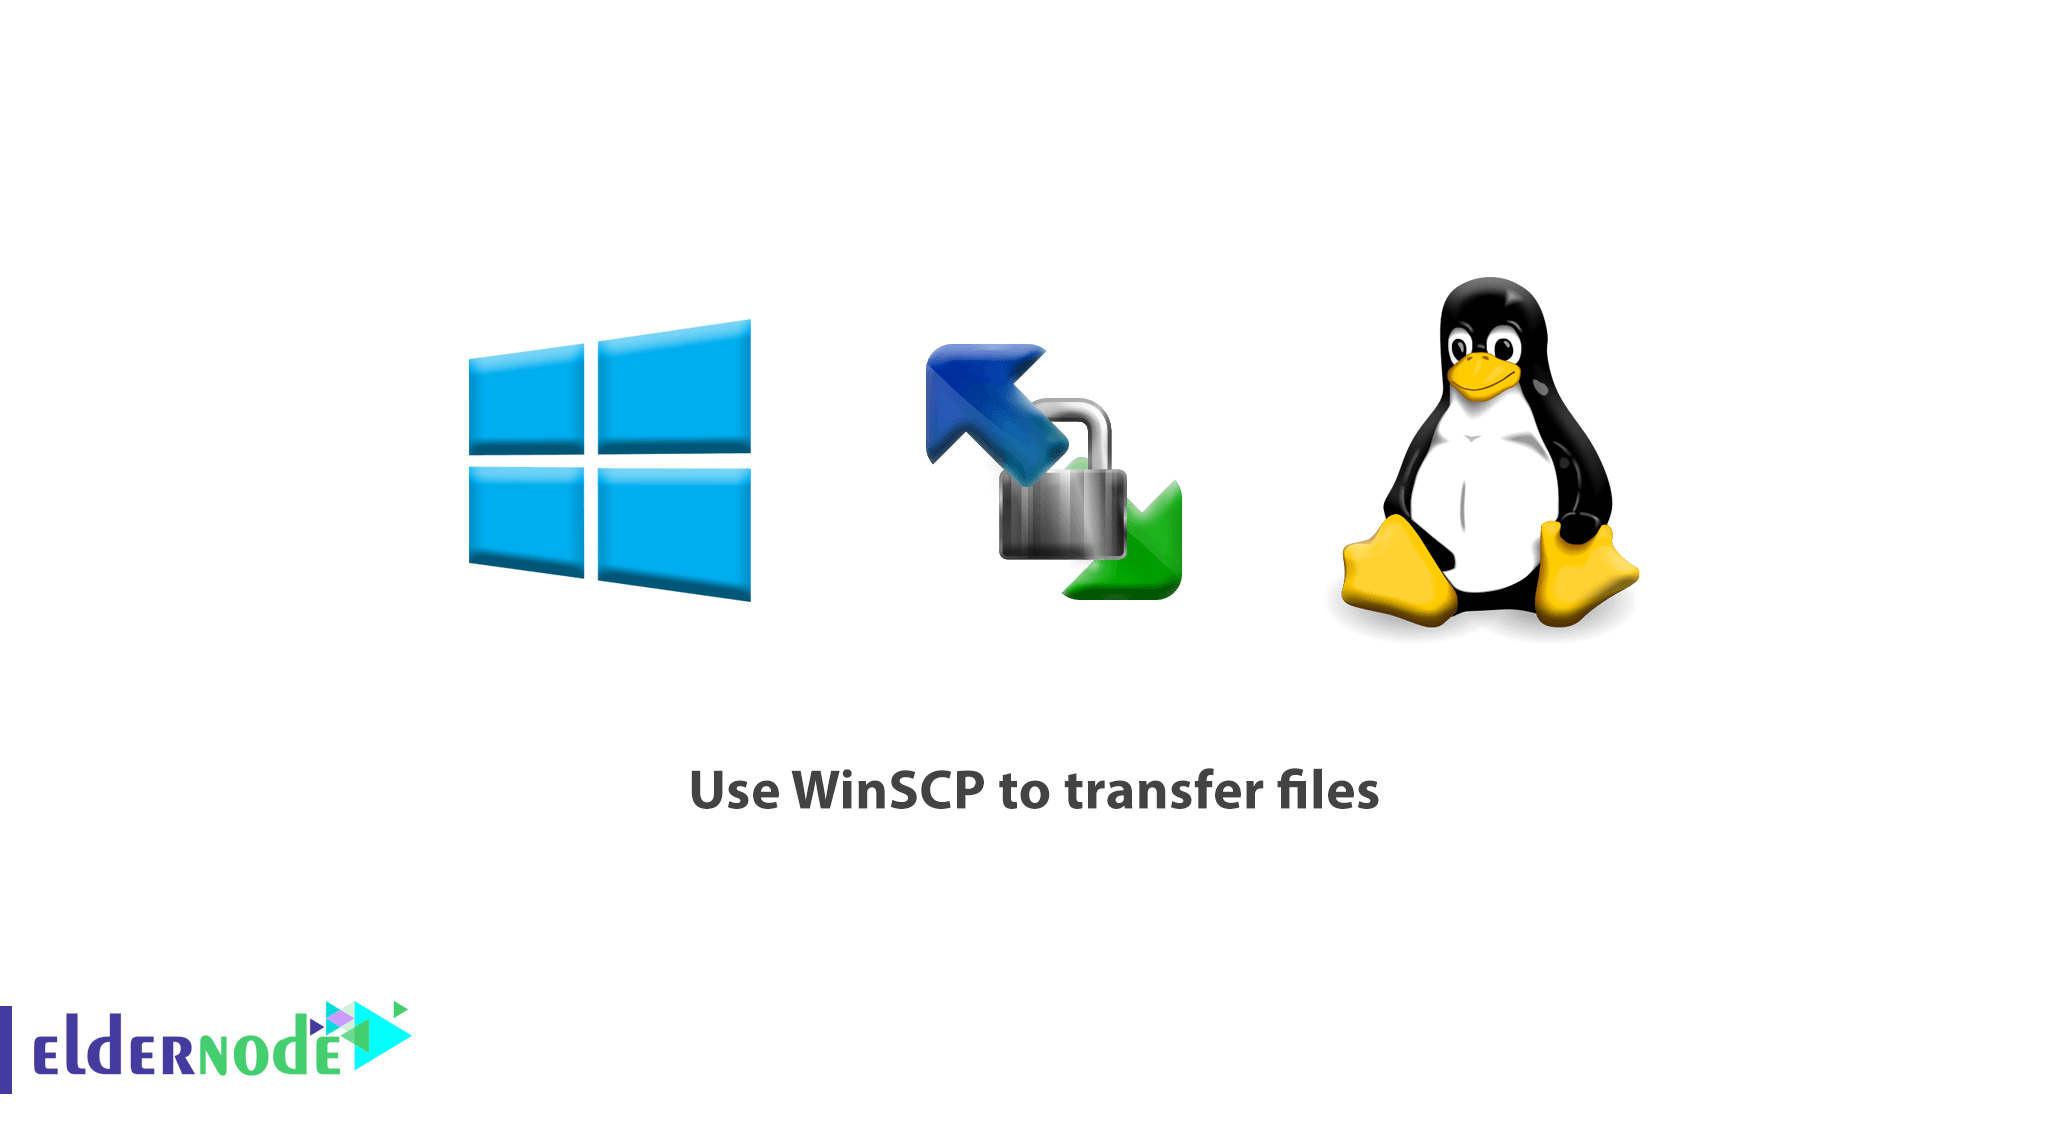 How to use WINSCP to transfer files